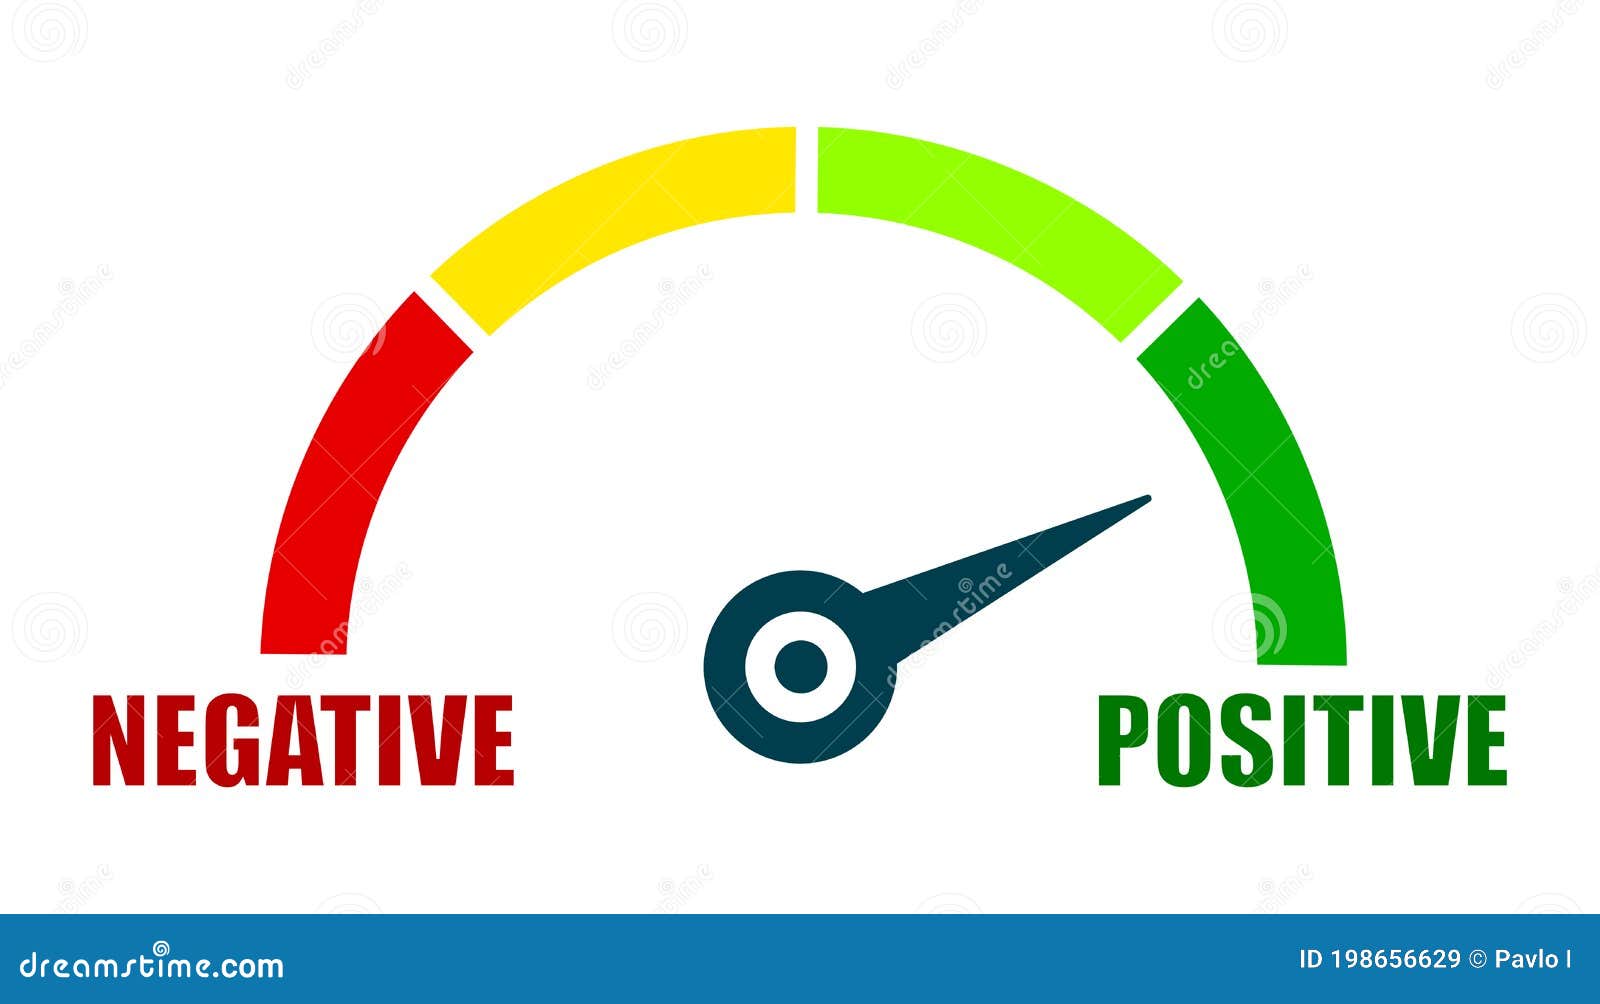 change to positive attitude. psychology concept with scale speed icon Ã¢â¬â 